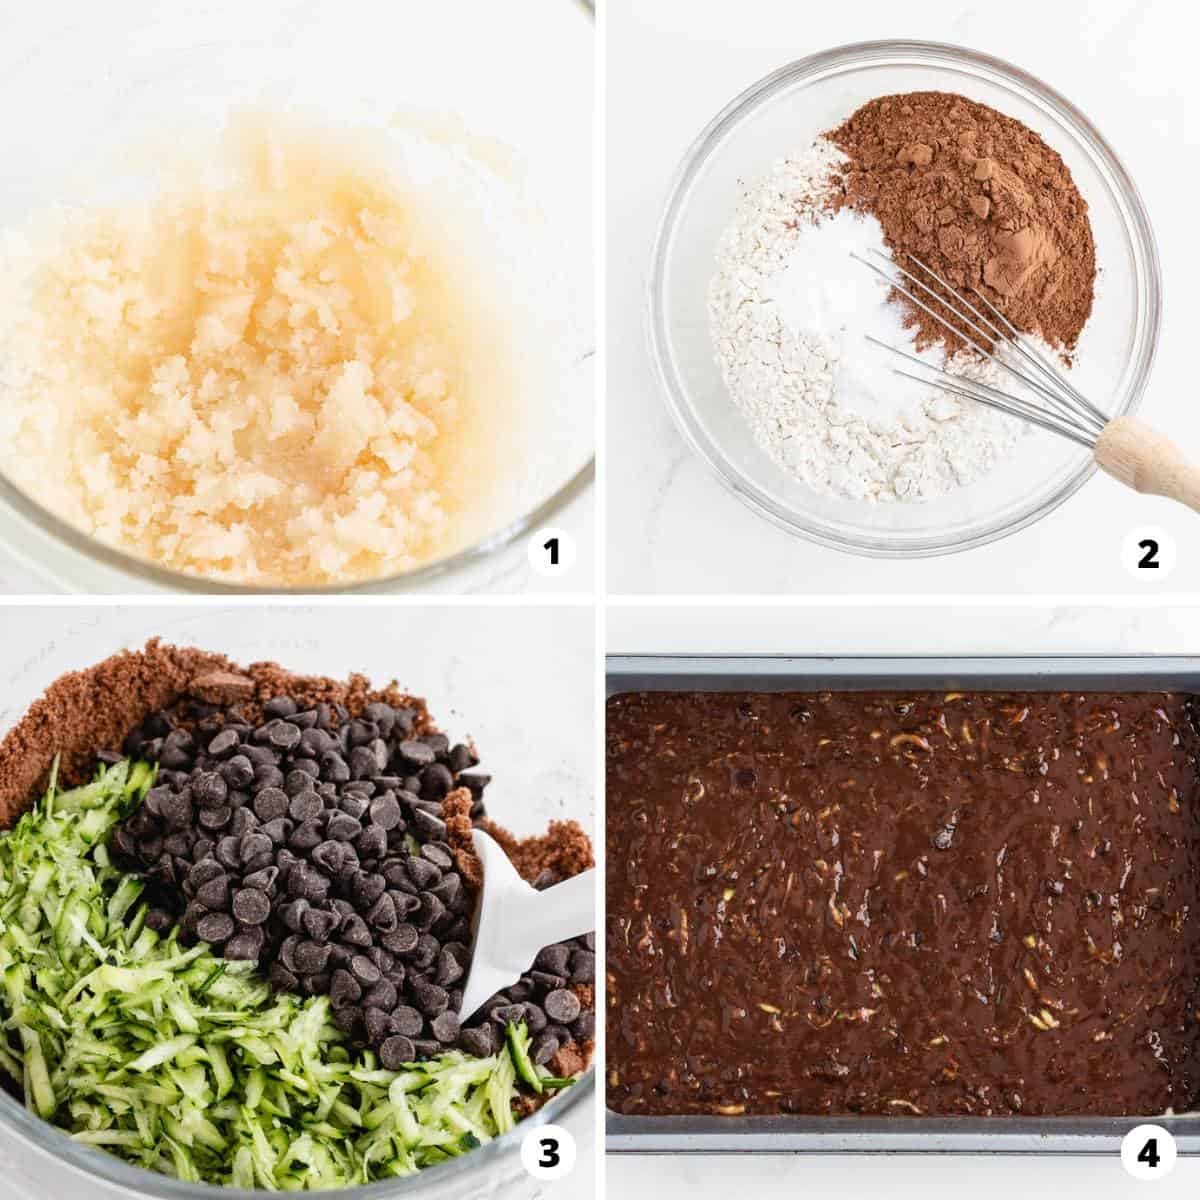 Showing how to make zucchini brownies in a 4 step collage.